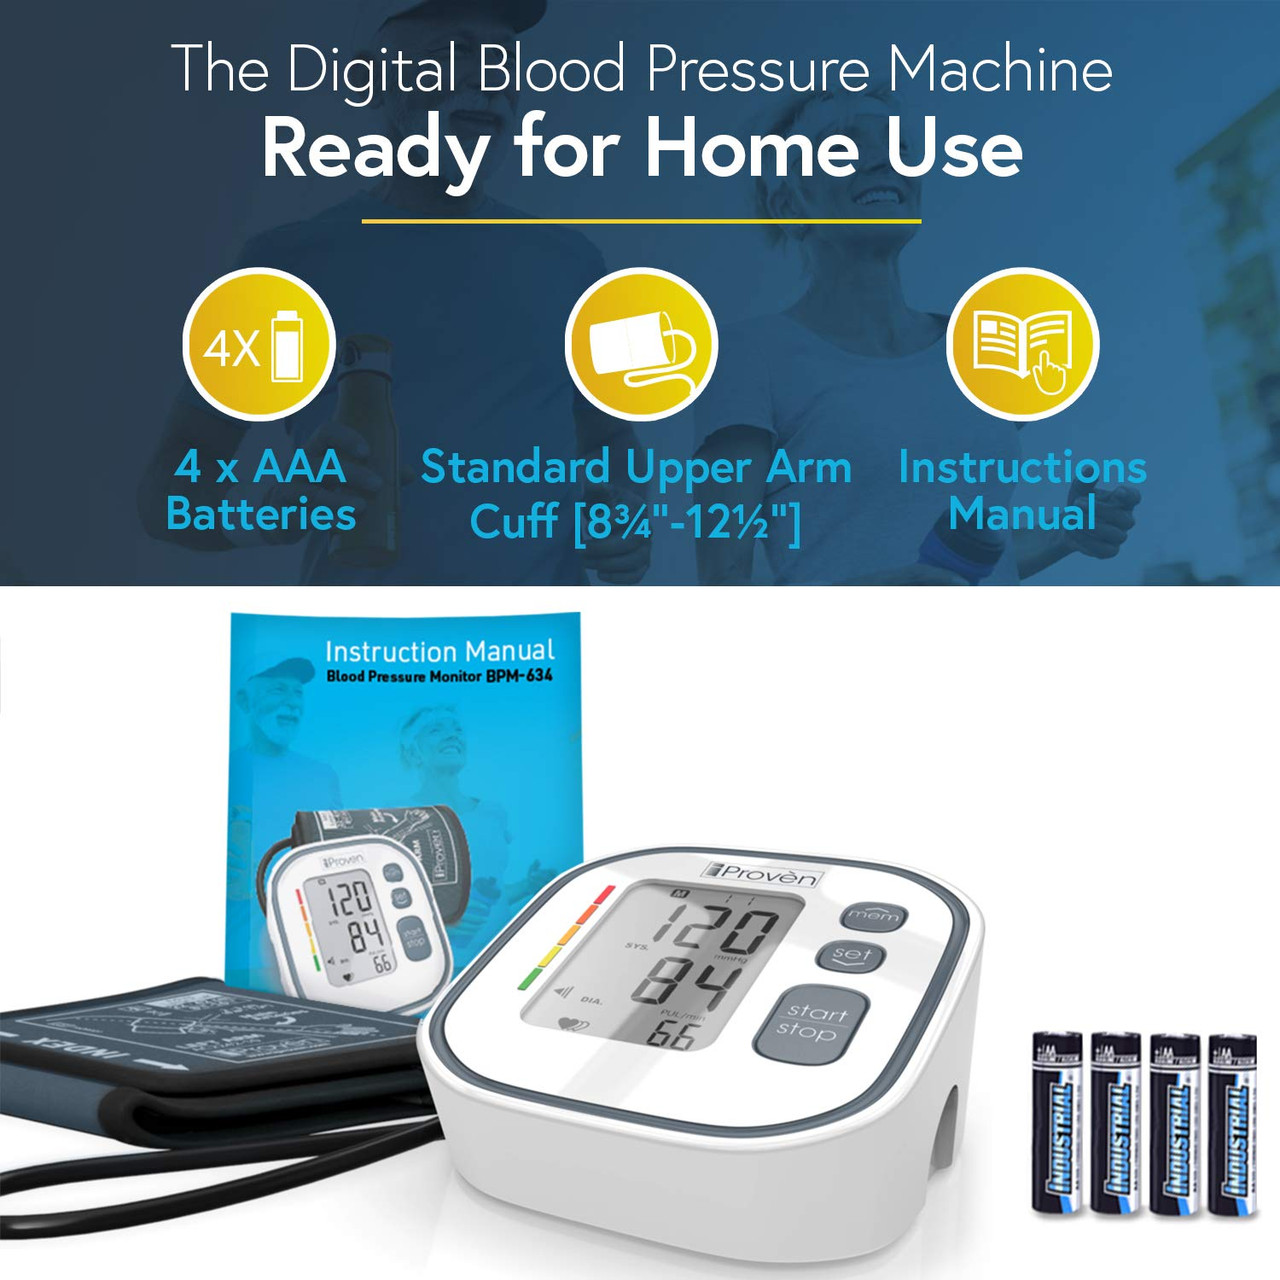 2020 Model] iProven Blood Pressure Monitor - Large Screen with Backlight -  60-Reading Memory - Blood Pressure Cuff